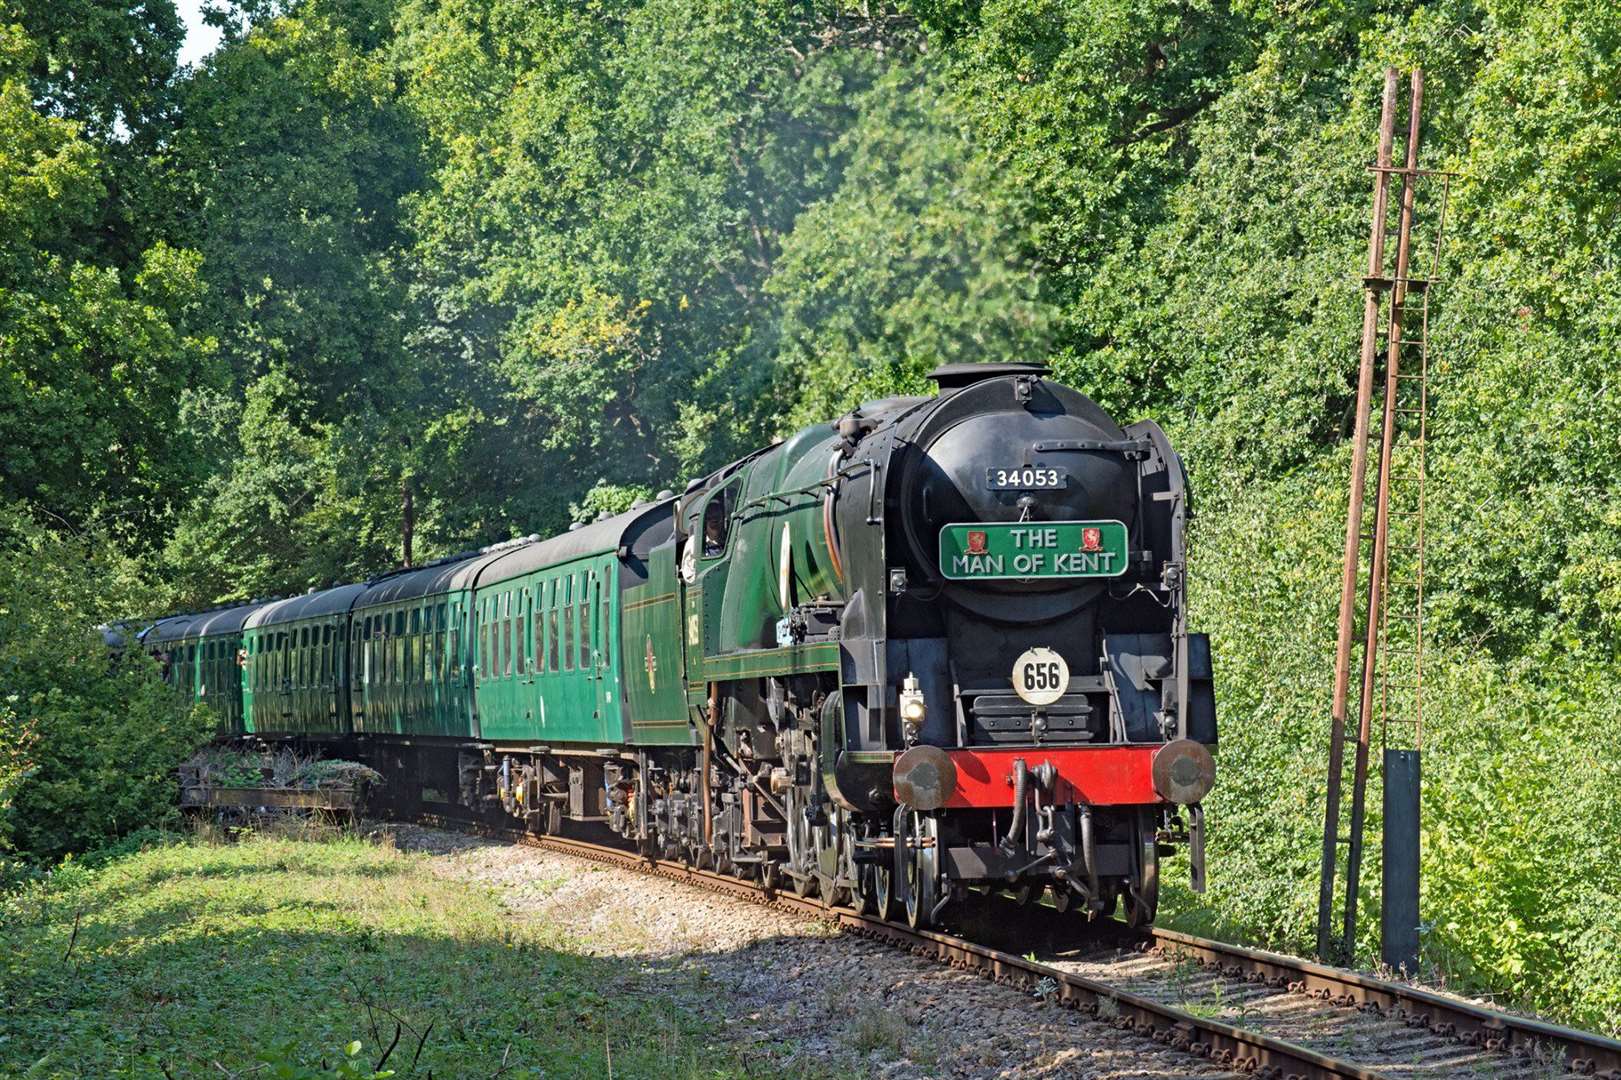 Take a steam train on the Spa Valley Railway